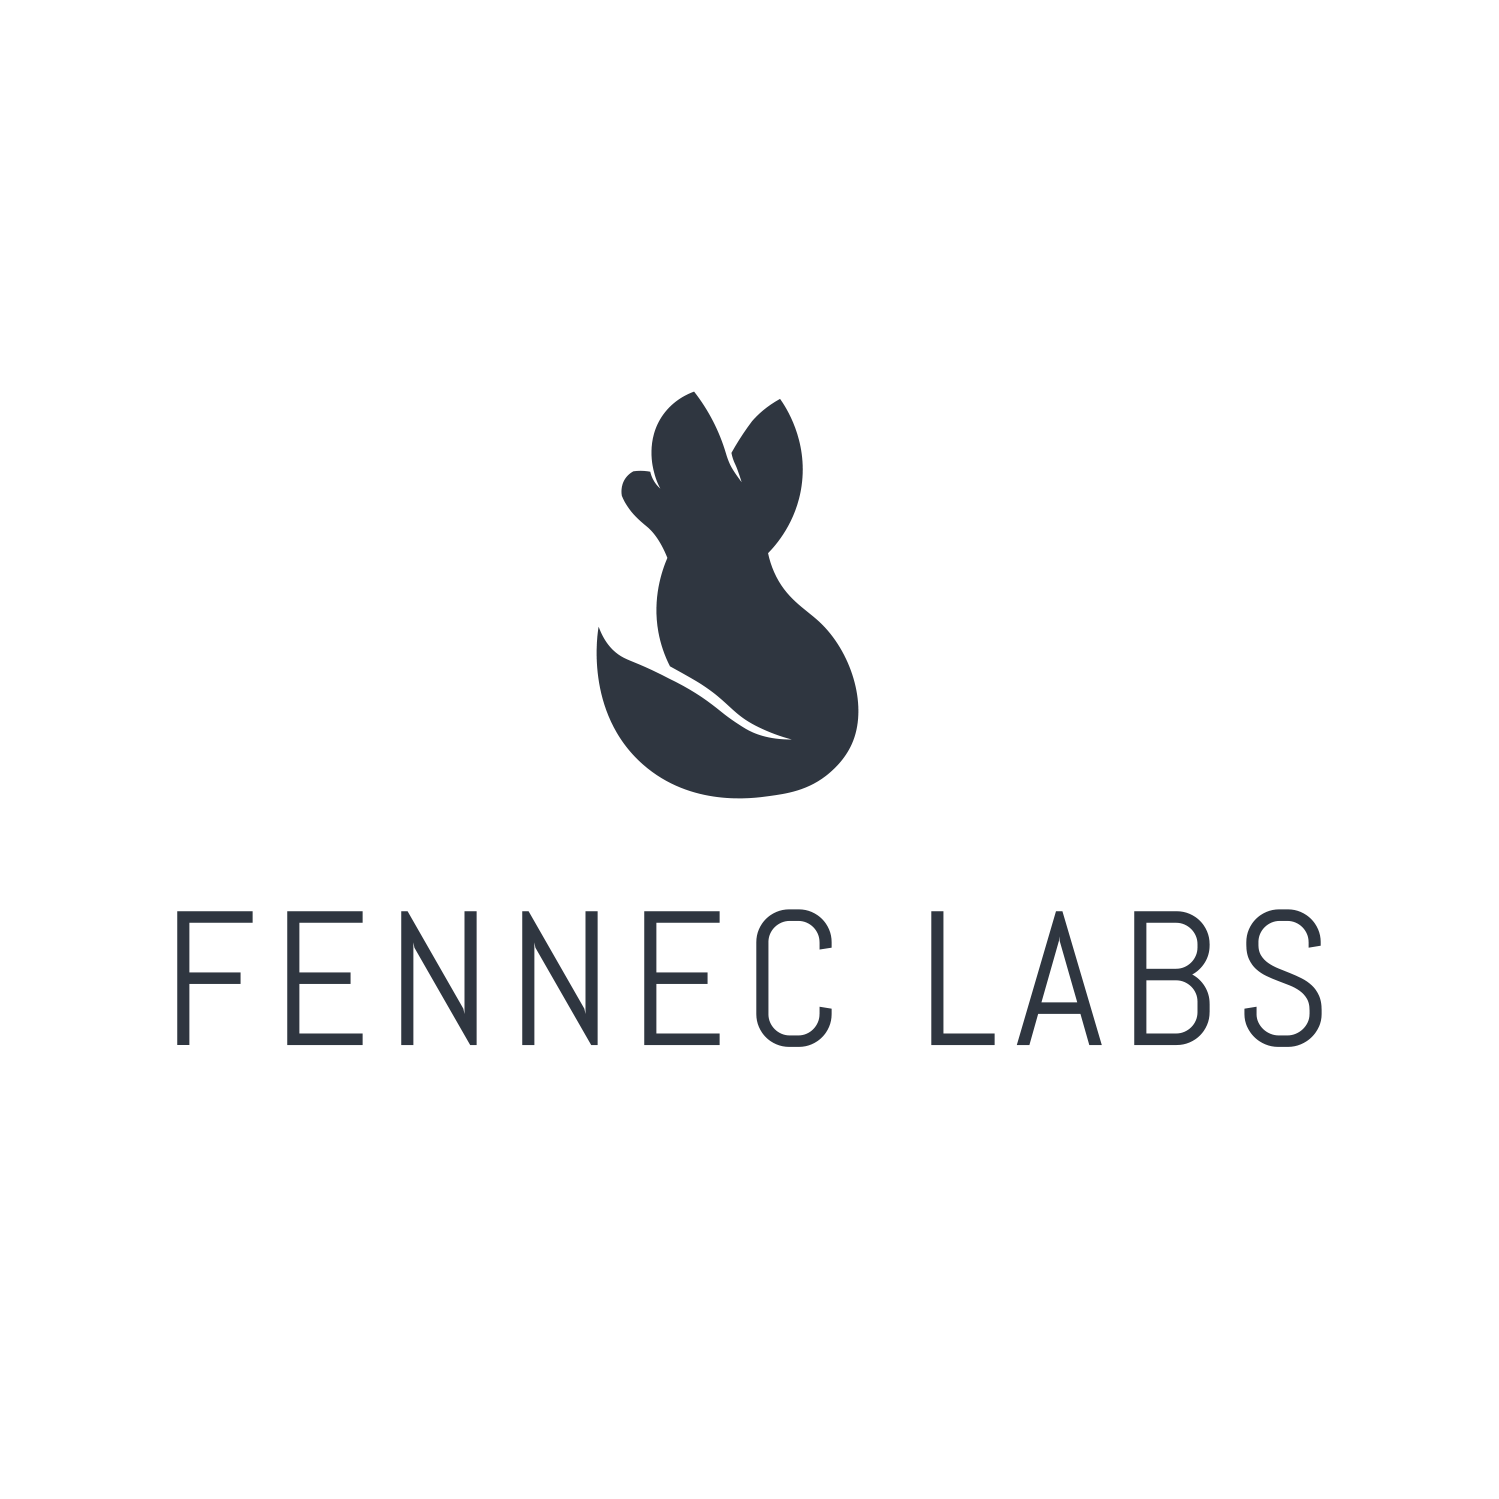 Fennec Labs